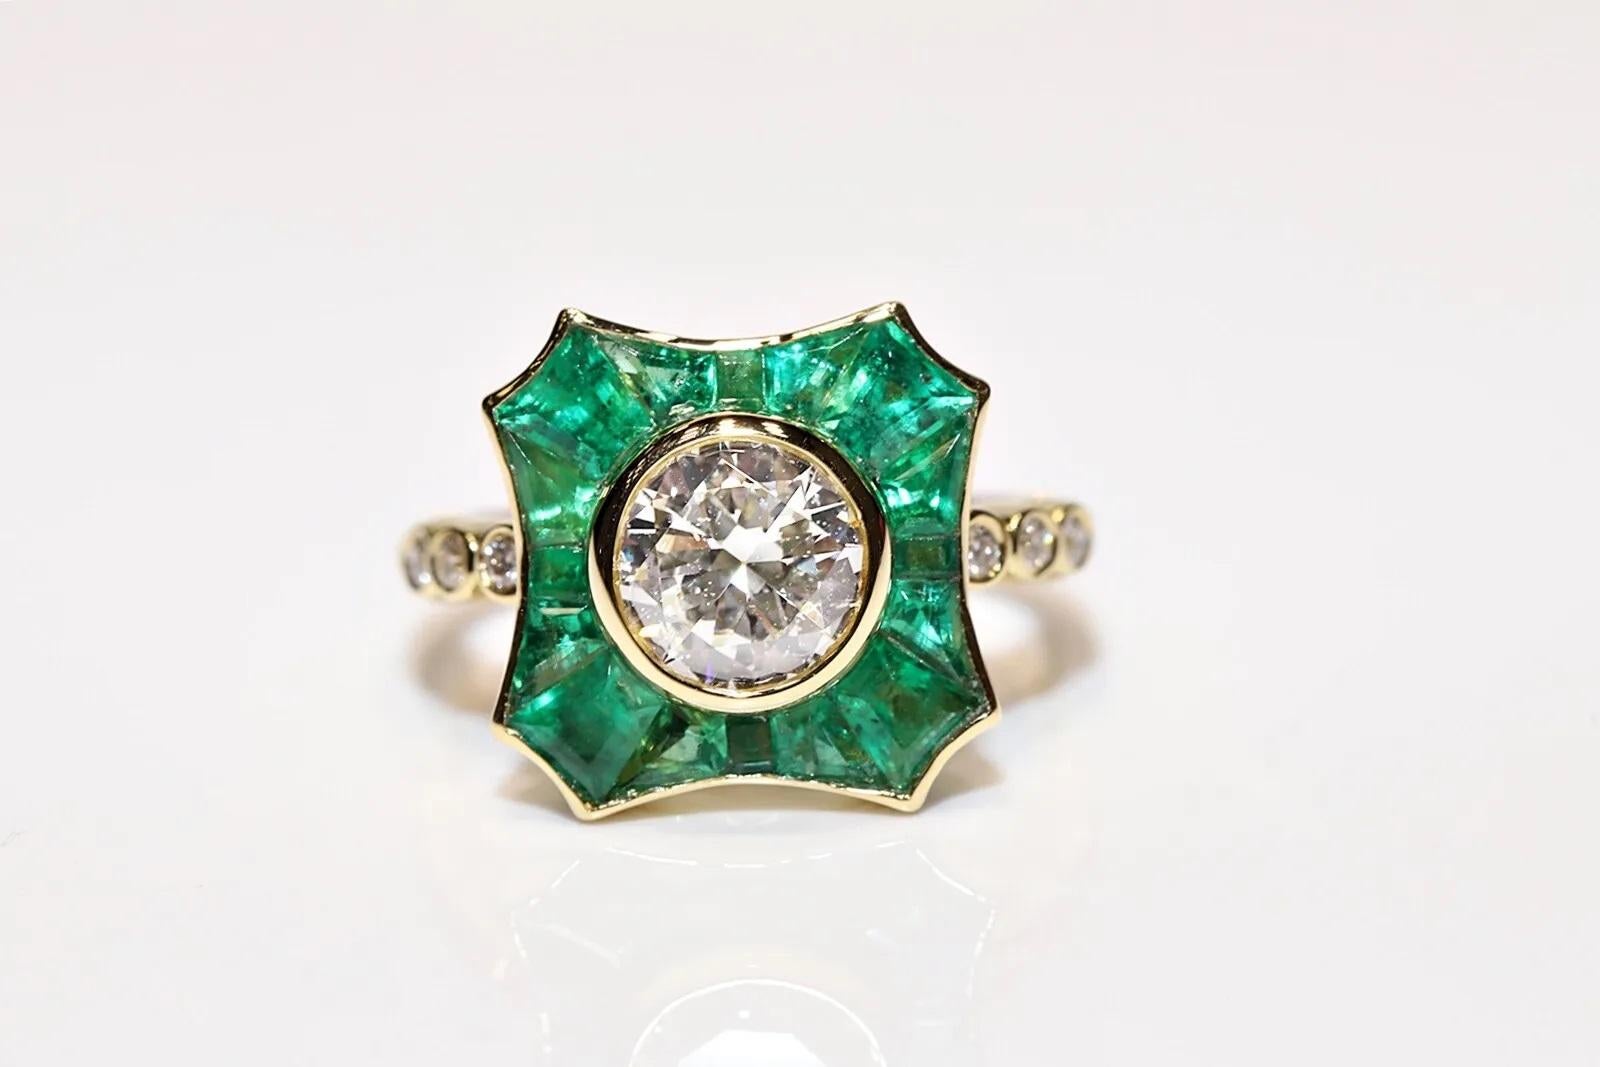 In very good condition.
Total weight is 6 is  grams.
The center Diamond 1.33 is  carat.
Side diamonds are totally 0.10 carat.
All the diamonds are  G color and have vs clarity.
Total Emerald Caliber is 2.50 carat.
Ring size is US 6.8 (We offer free